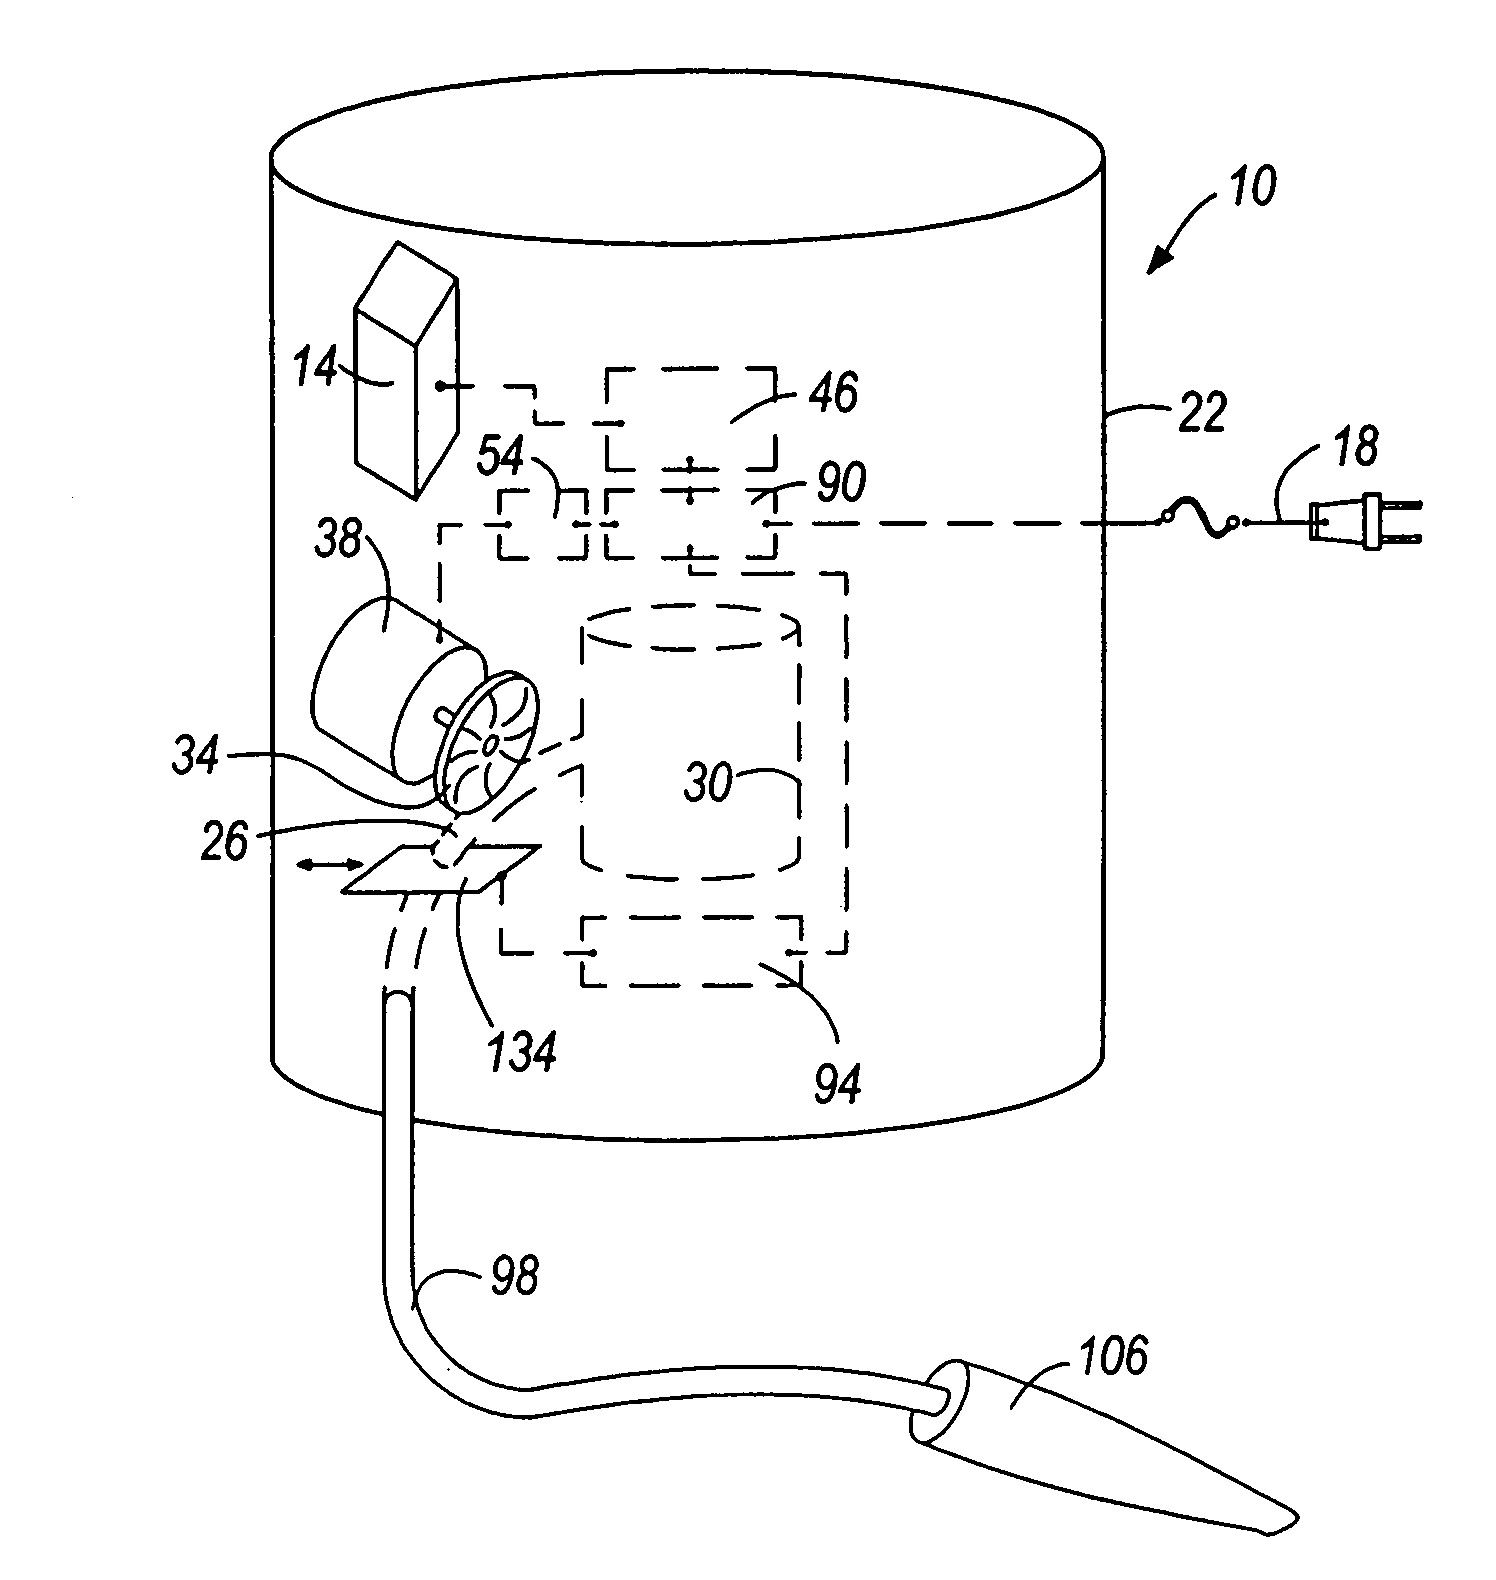 Air flow-producing device, such as a vacuum cleaner or a blower